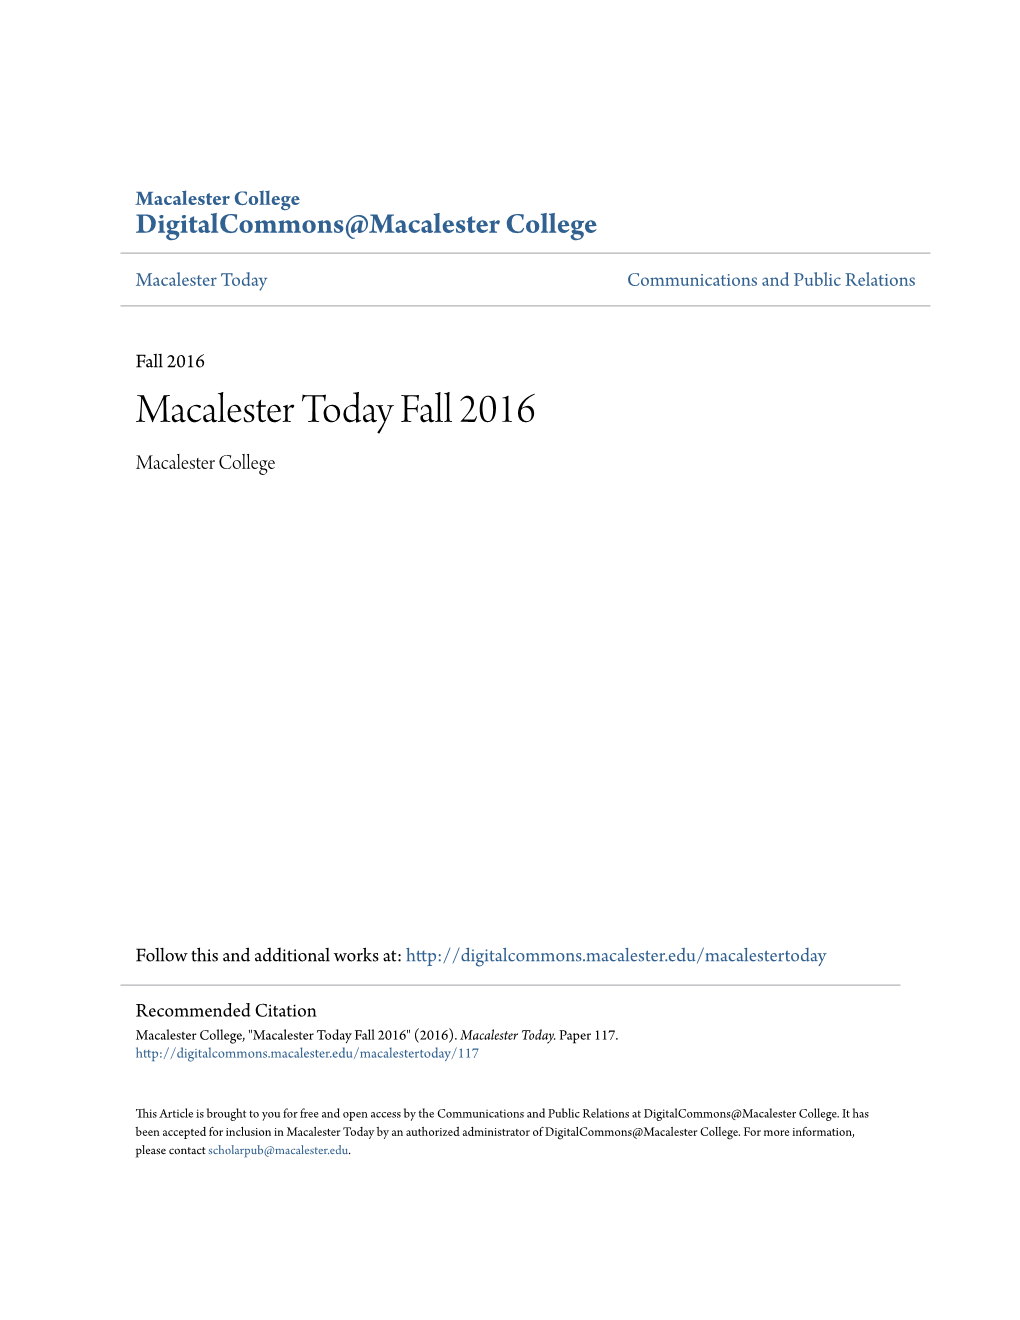 Macalester Today Fall 2016 Macalester College